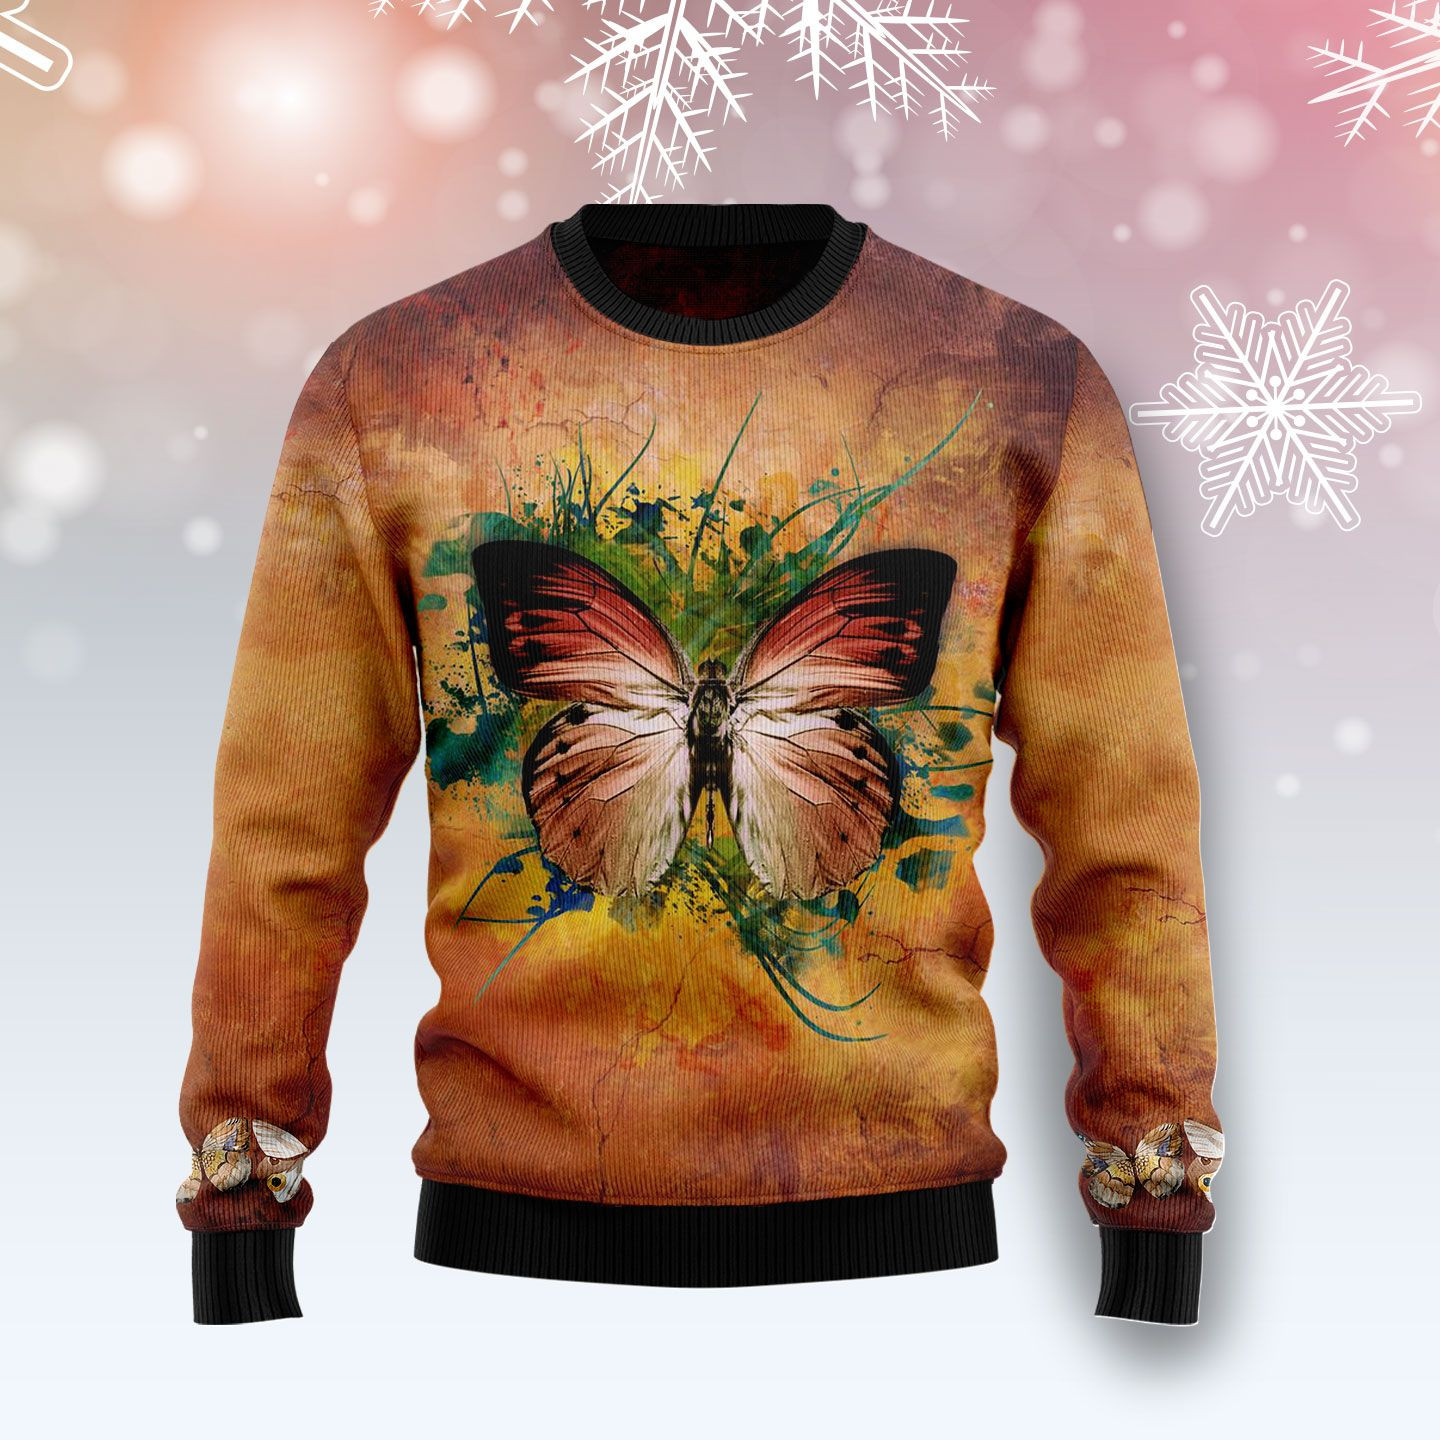 Butterfly Vintage Ugly Christmas Sweater Ugly Sweater For Men Women